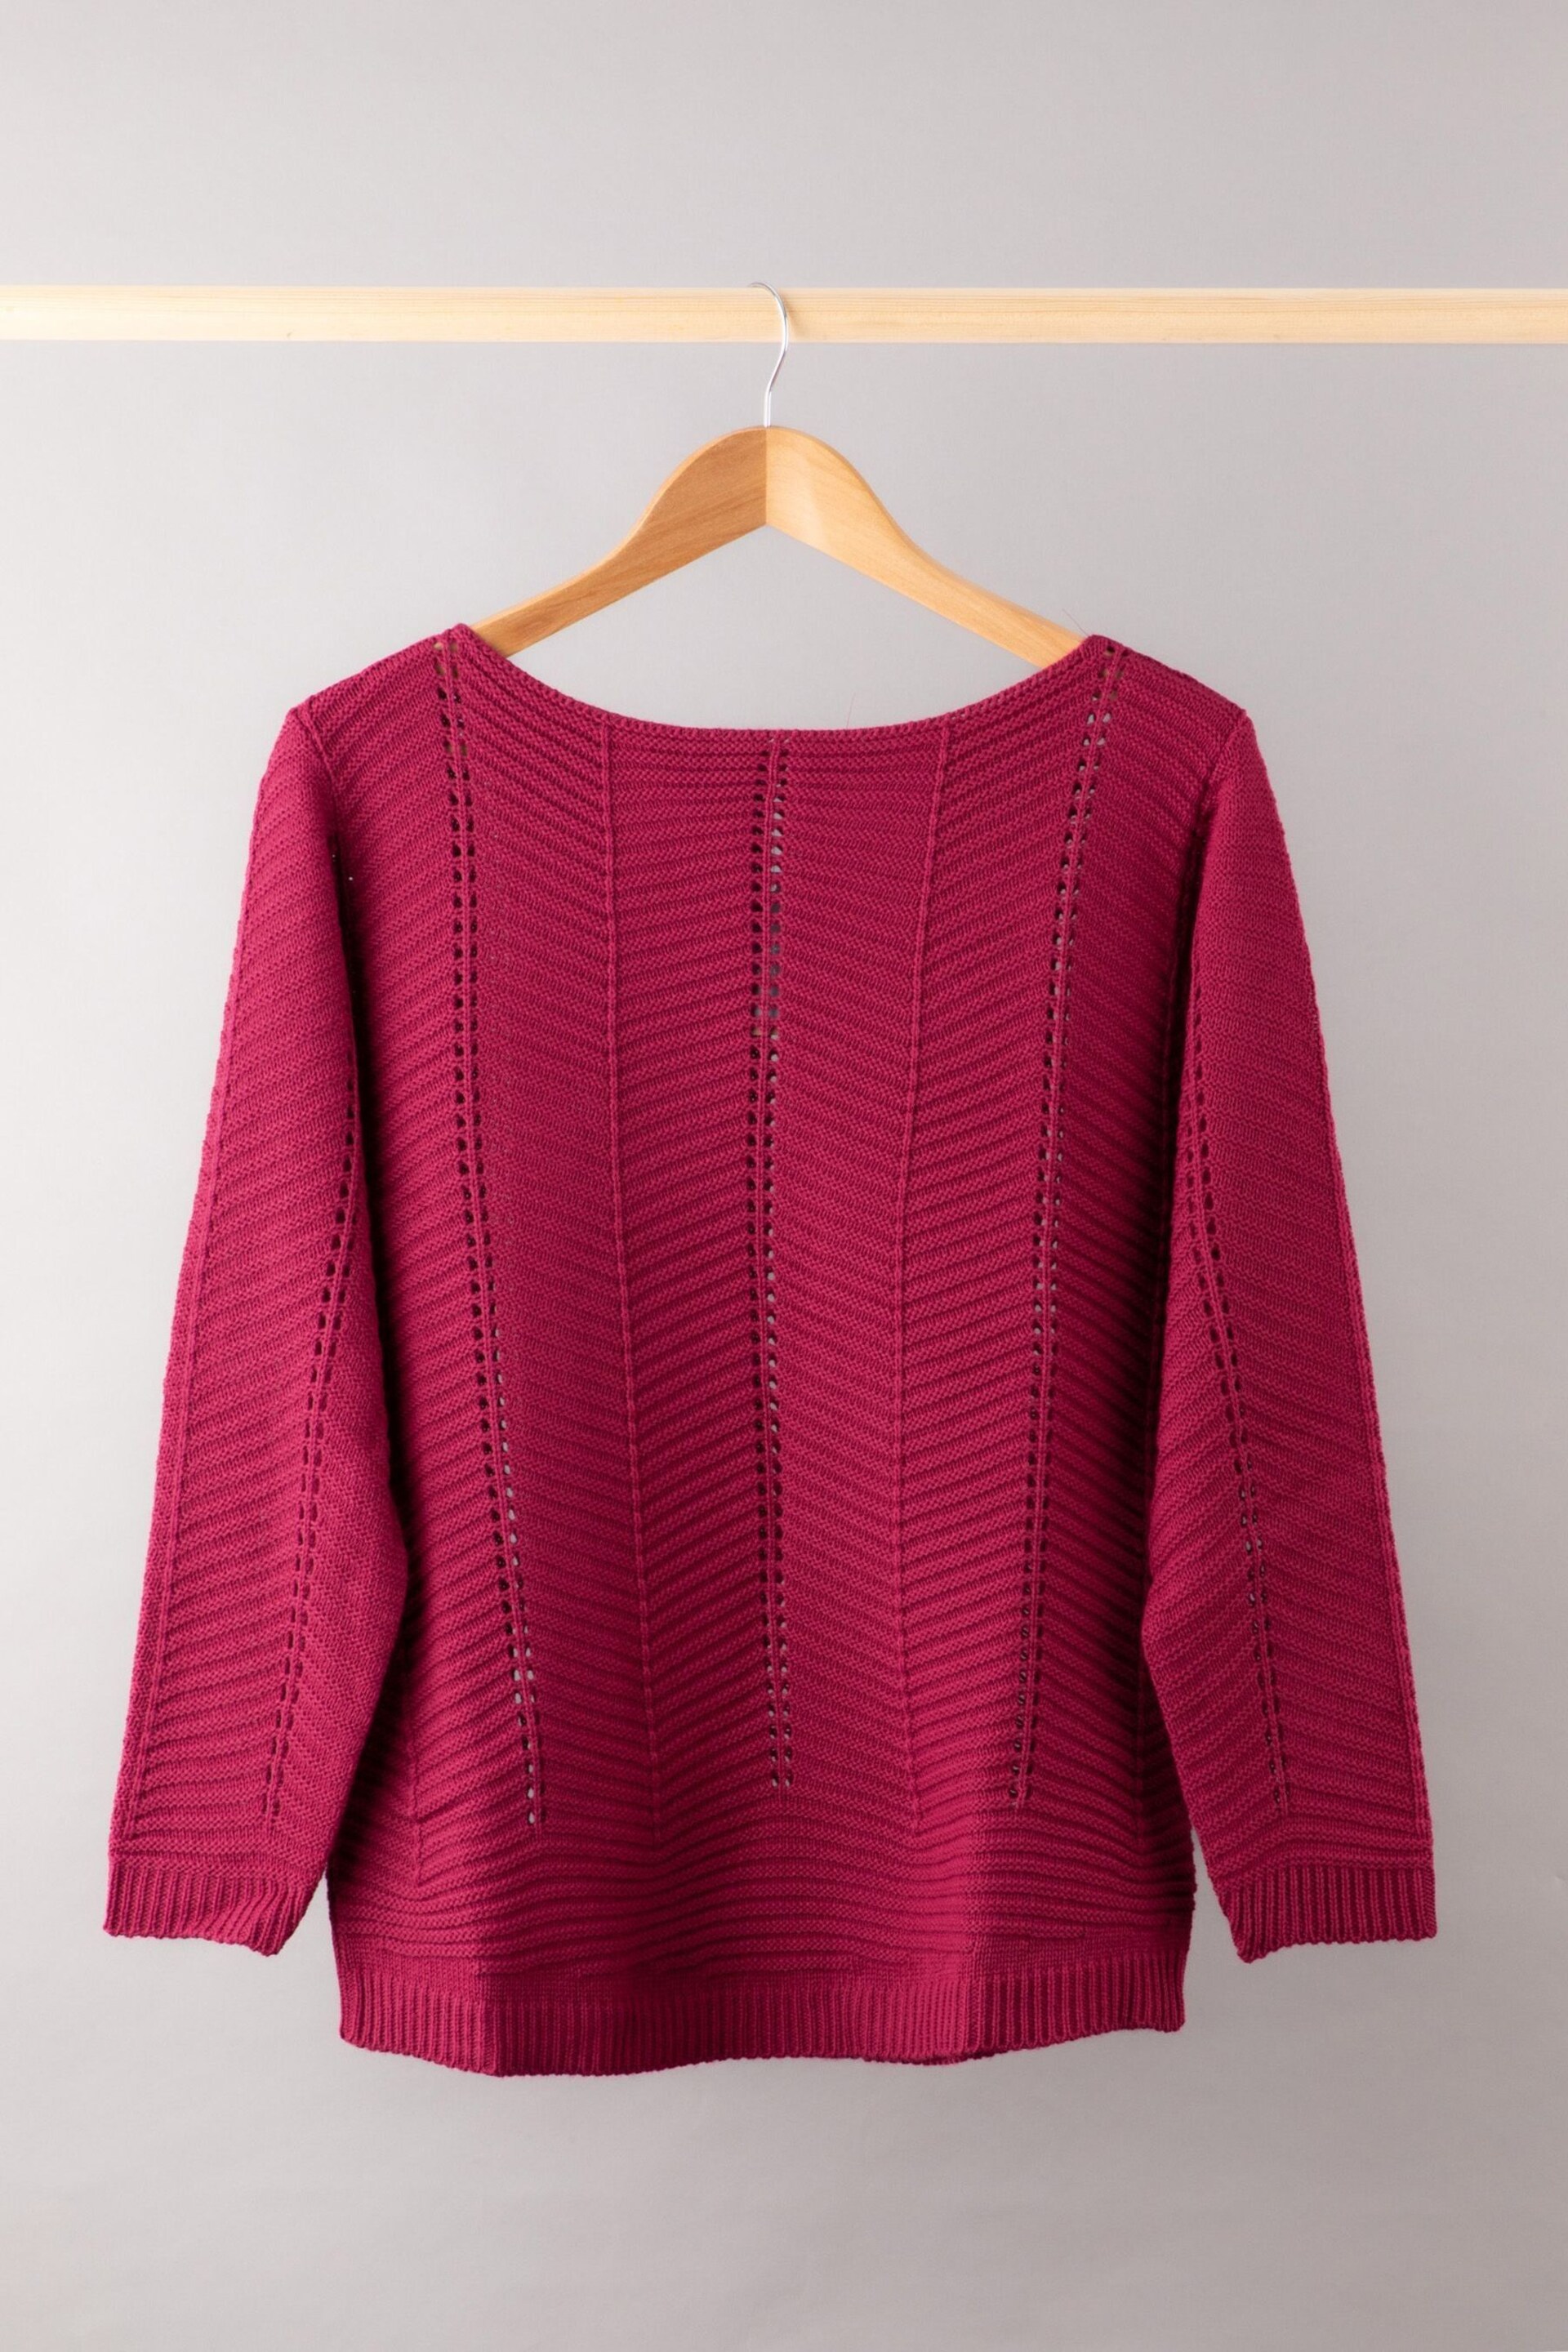 Lakeland Clothing Red Cleo Knitted Jumper - Image 1 of 3